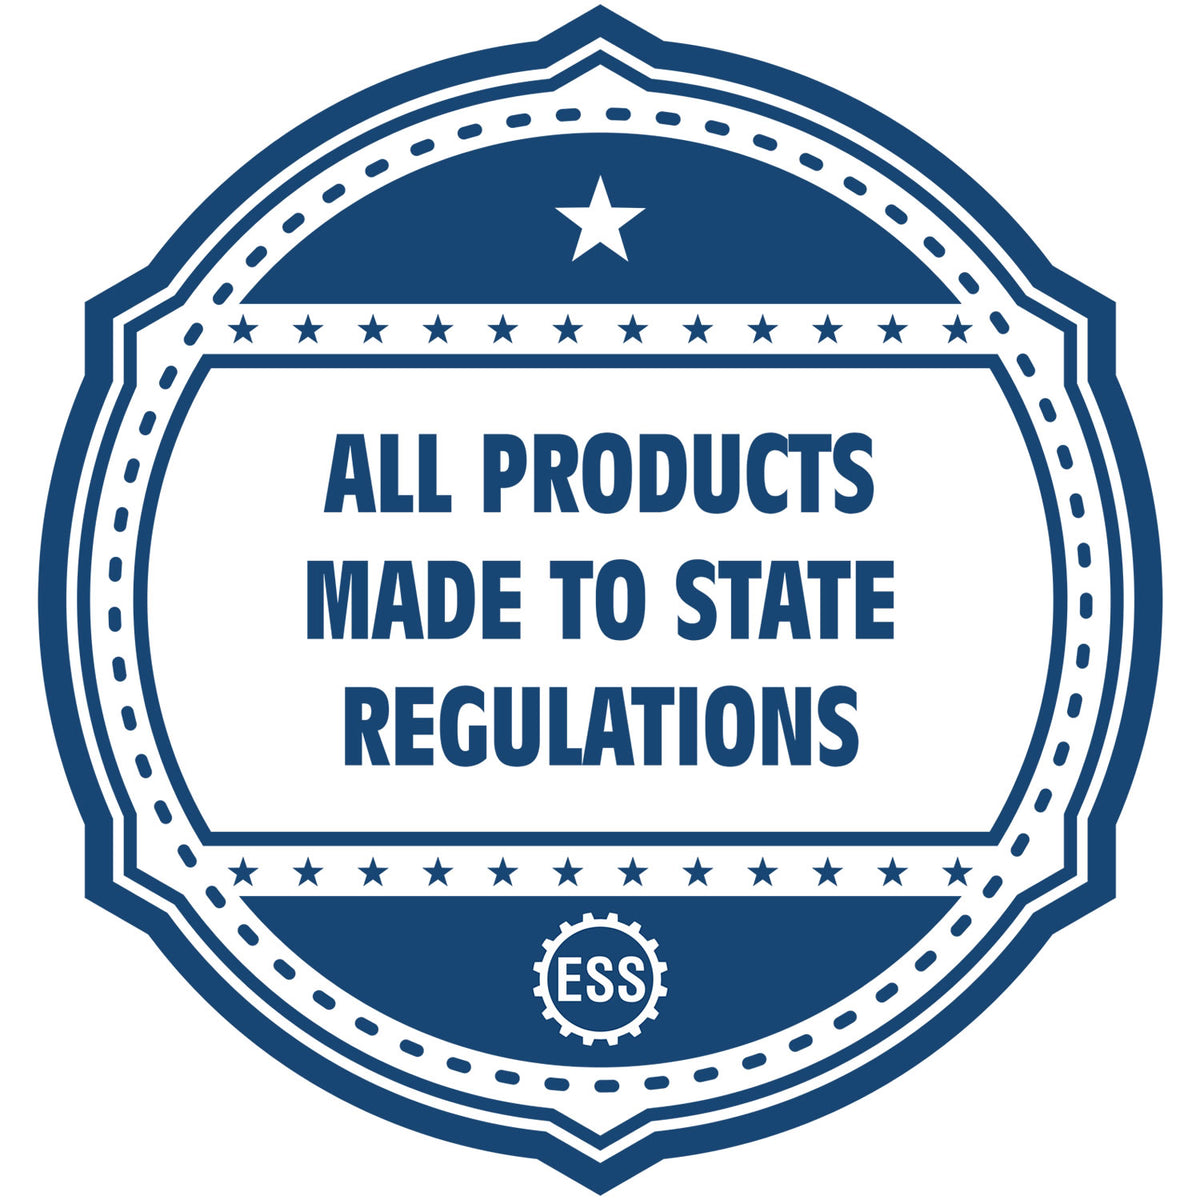 An icon or badge element for the Heavy Duty Cast Iron Wyoming Engineer Seal Embosser showing that this product is made in compliance with state regulations.